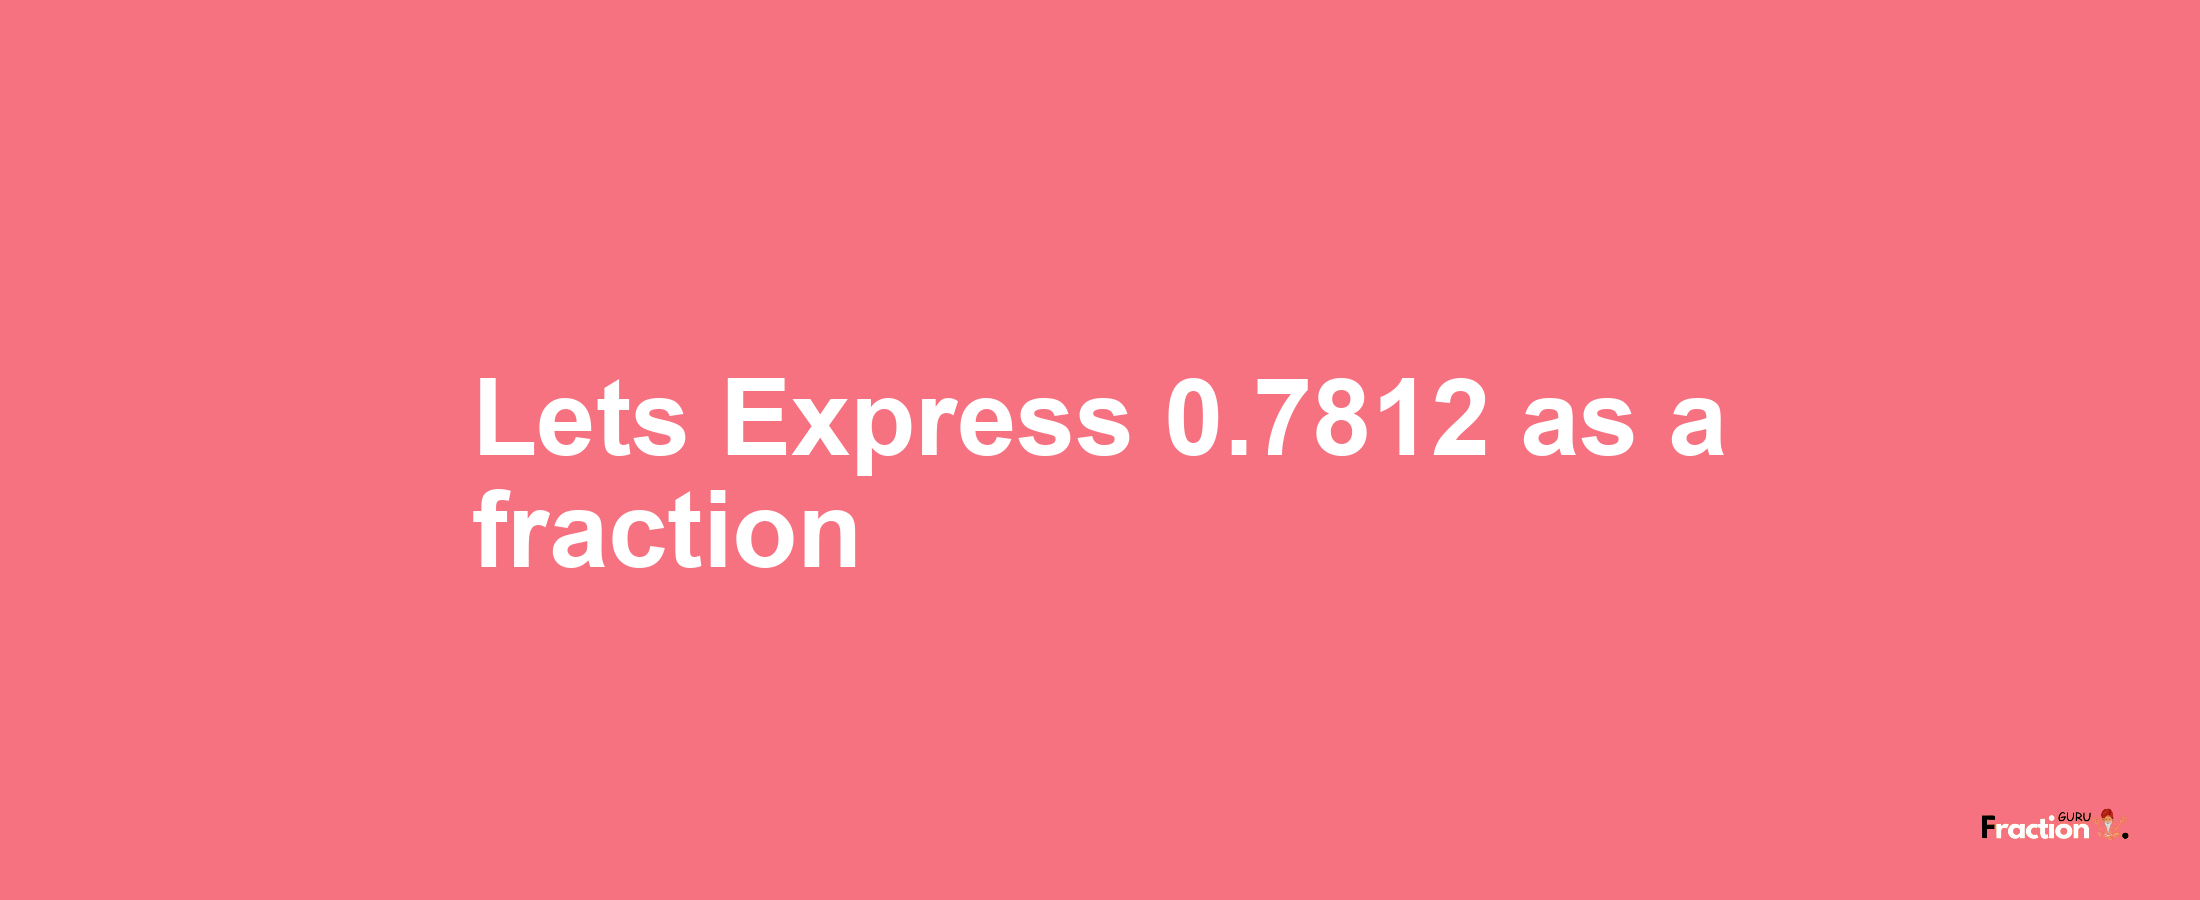 Lets Express 0.7812 as afraction